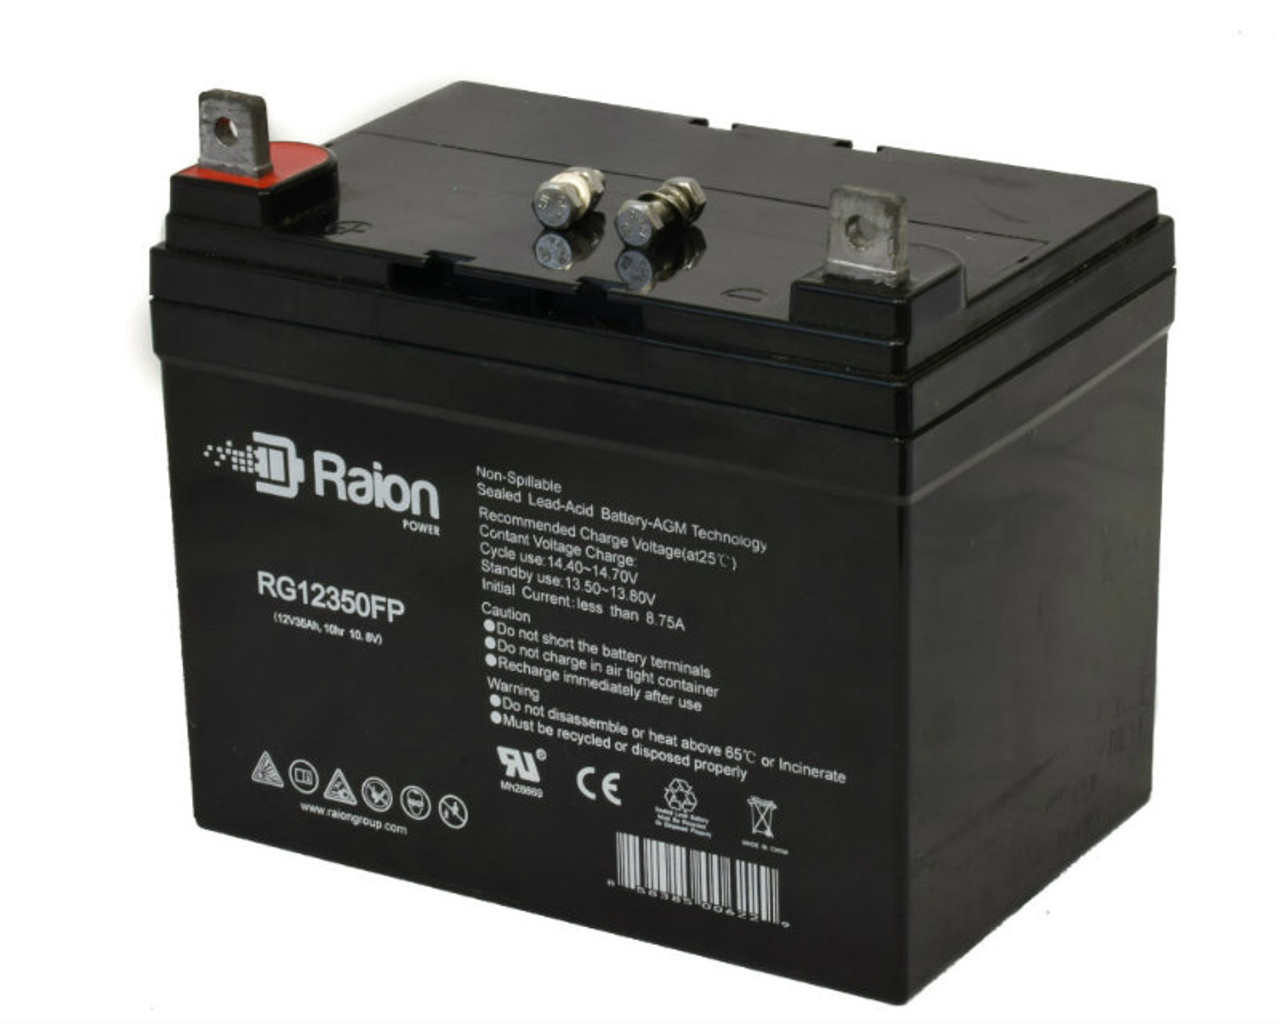 Raion Power Replacement 12V 35Ah RG12350FP Battery for Gravely ZT 2048